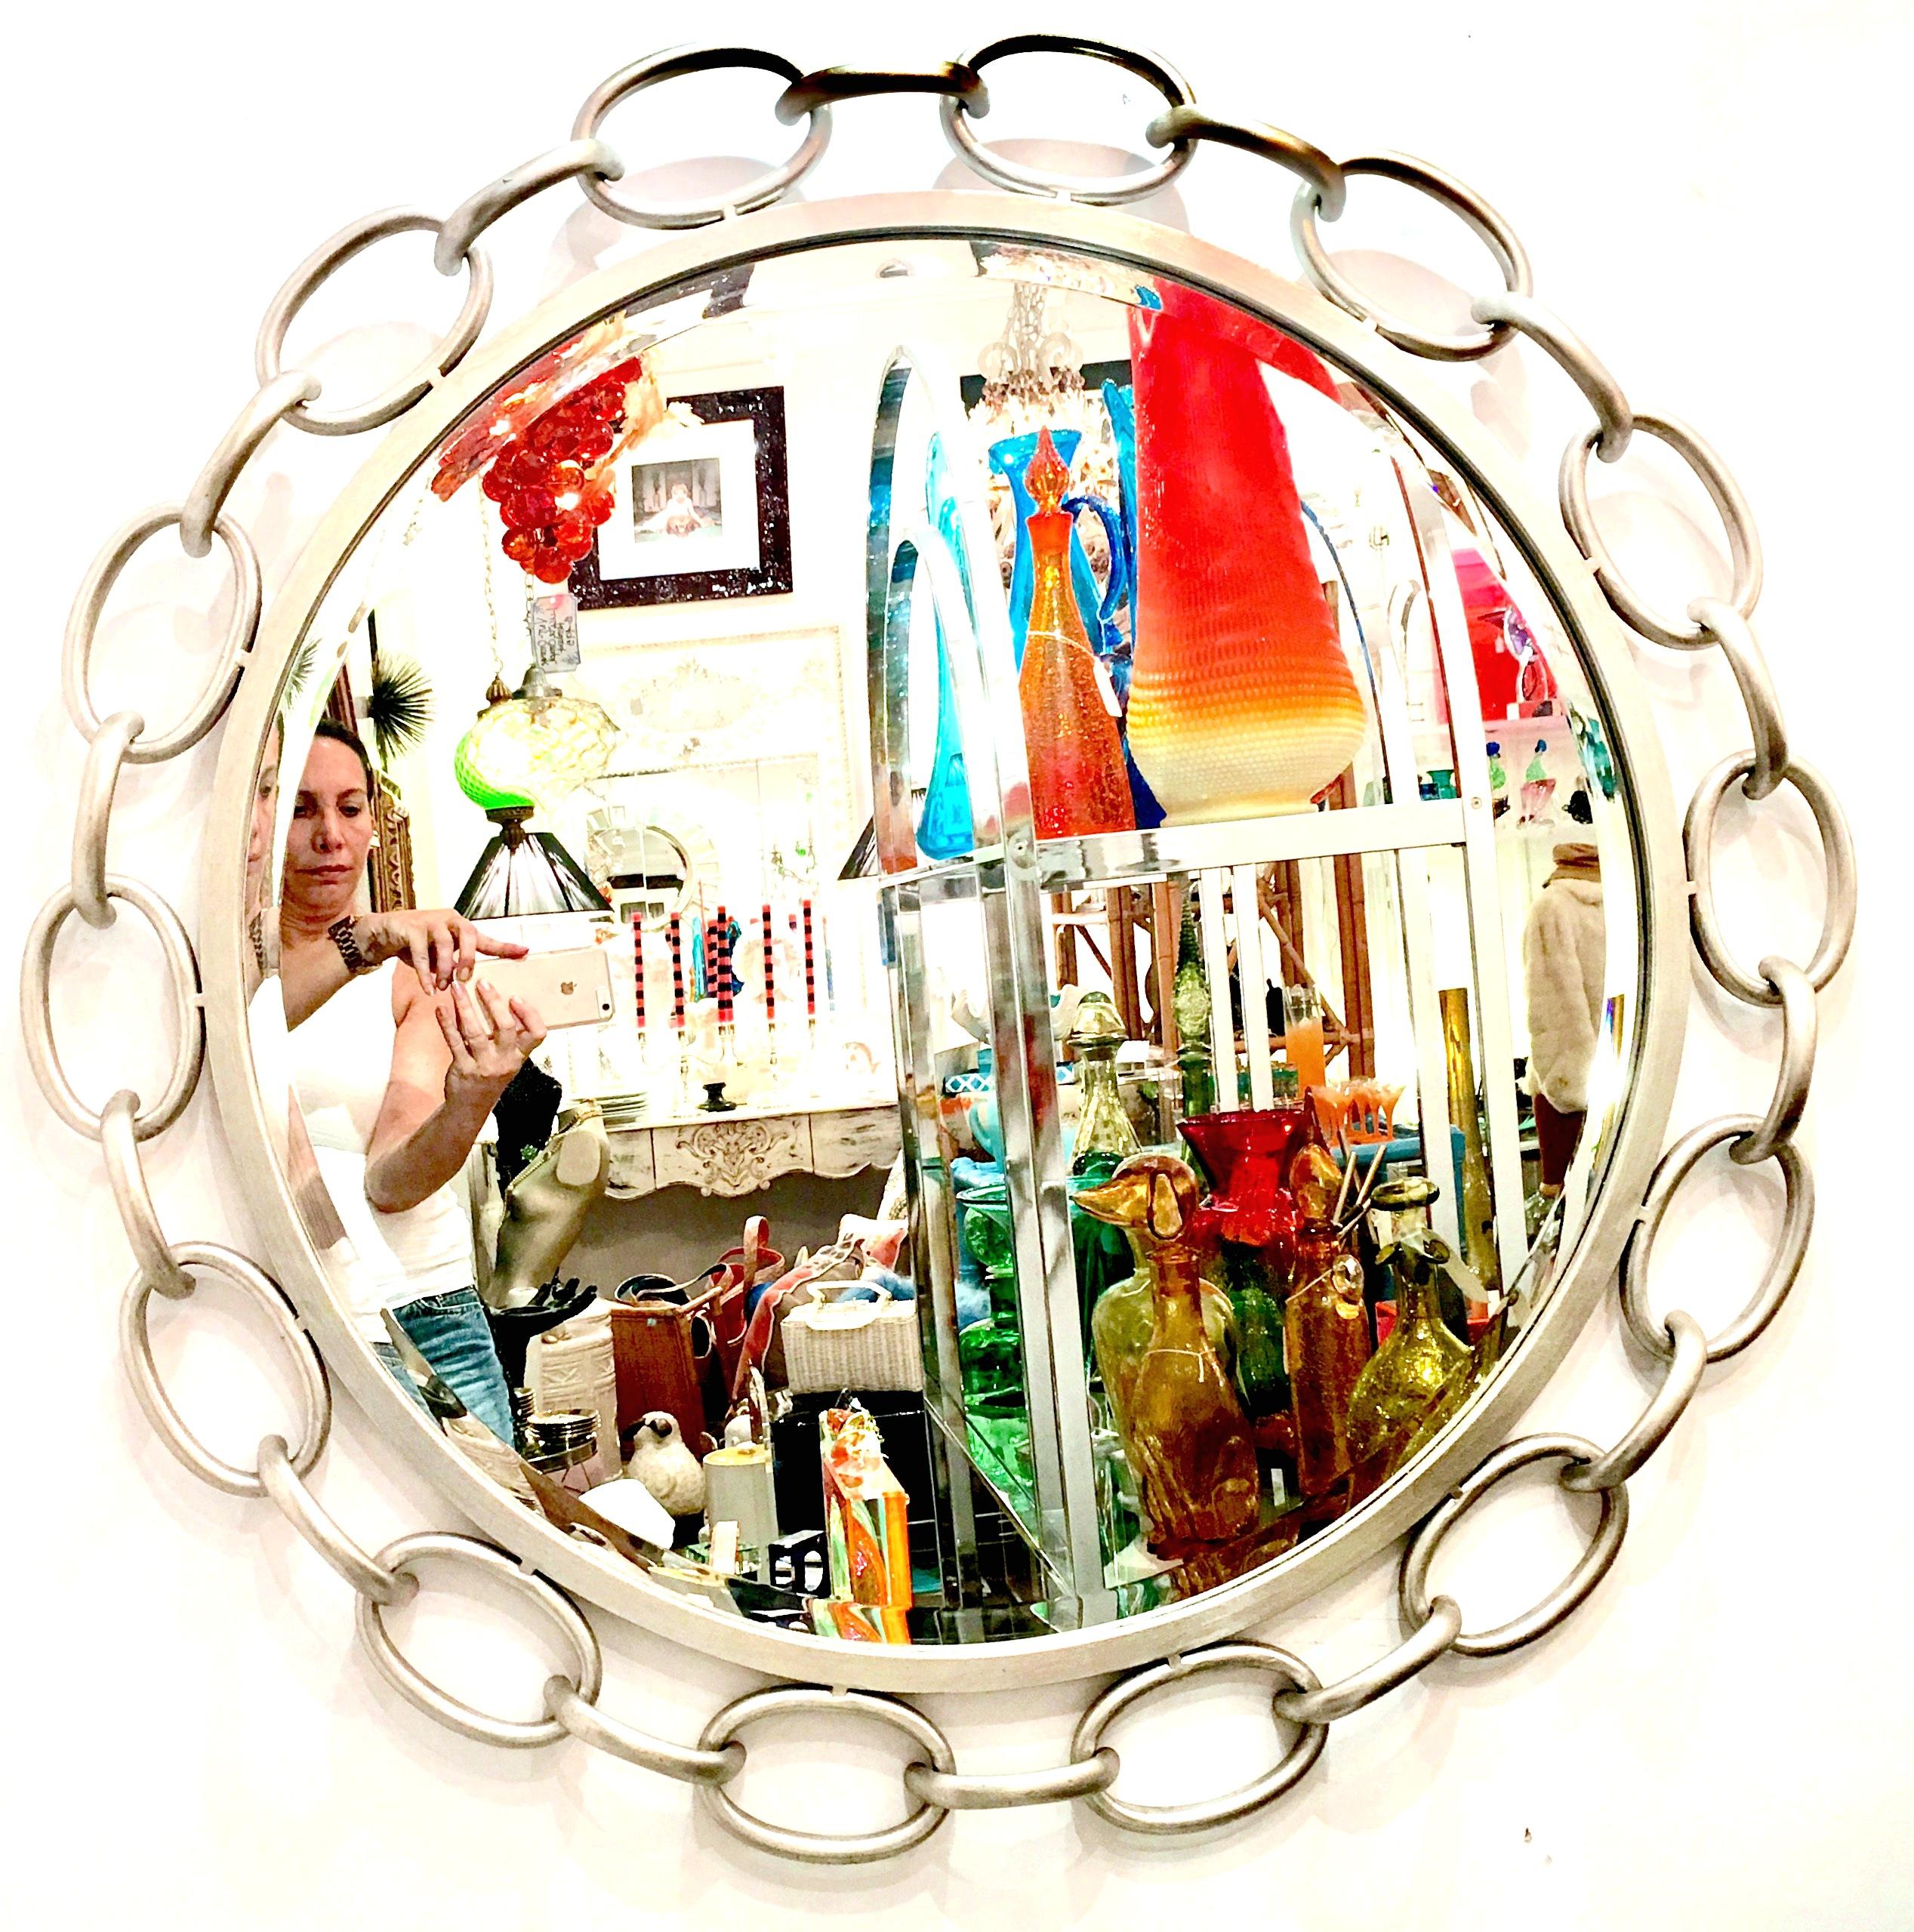 21st Century & New Silver Leaf Over Nickel Silver Chain Link Mirror. Features a beveled edge mirror. This 40